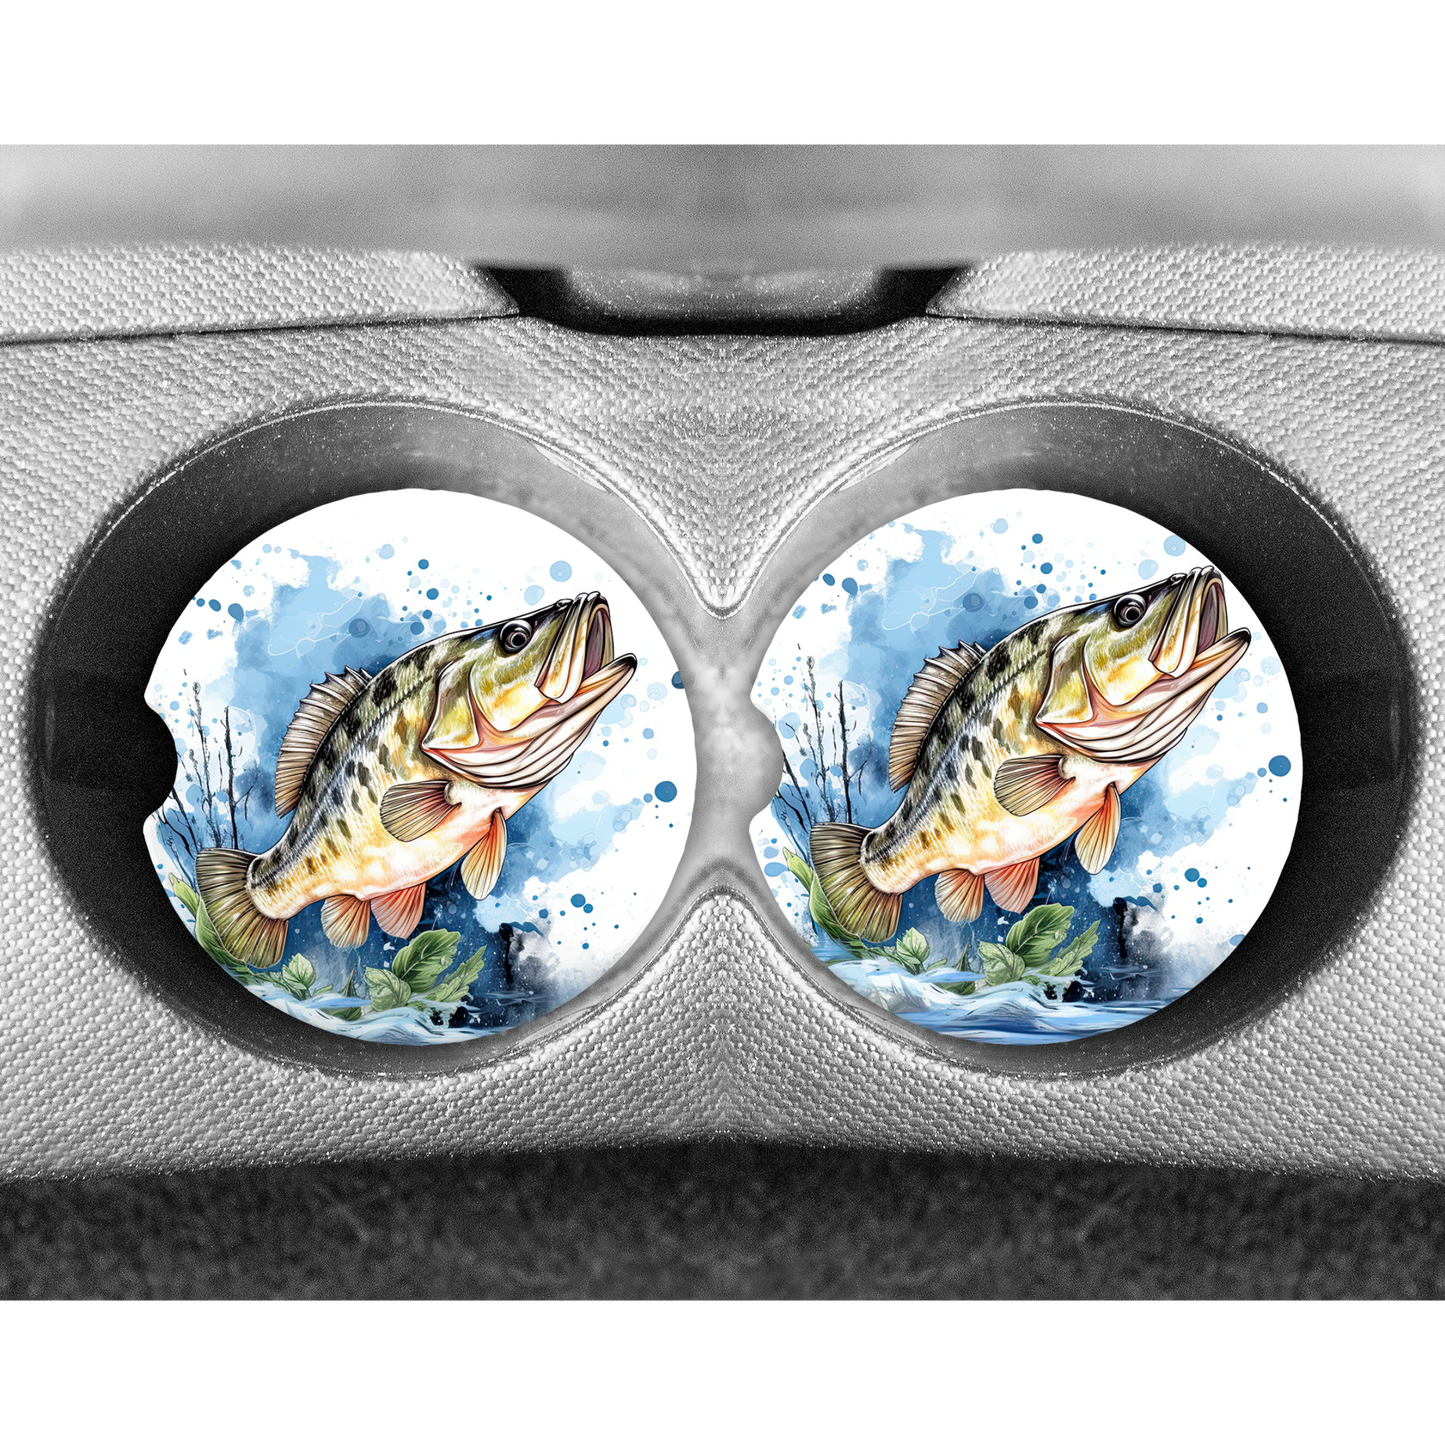 Premium Neoprene Car Coasters | Drink Holders for Your Car Console - Set of 2 Fish Design